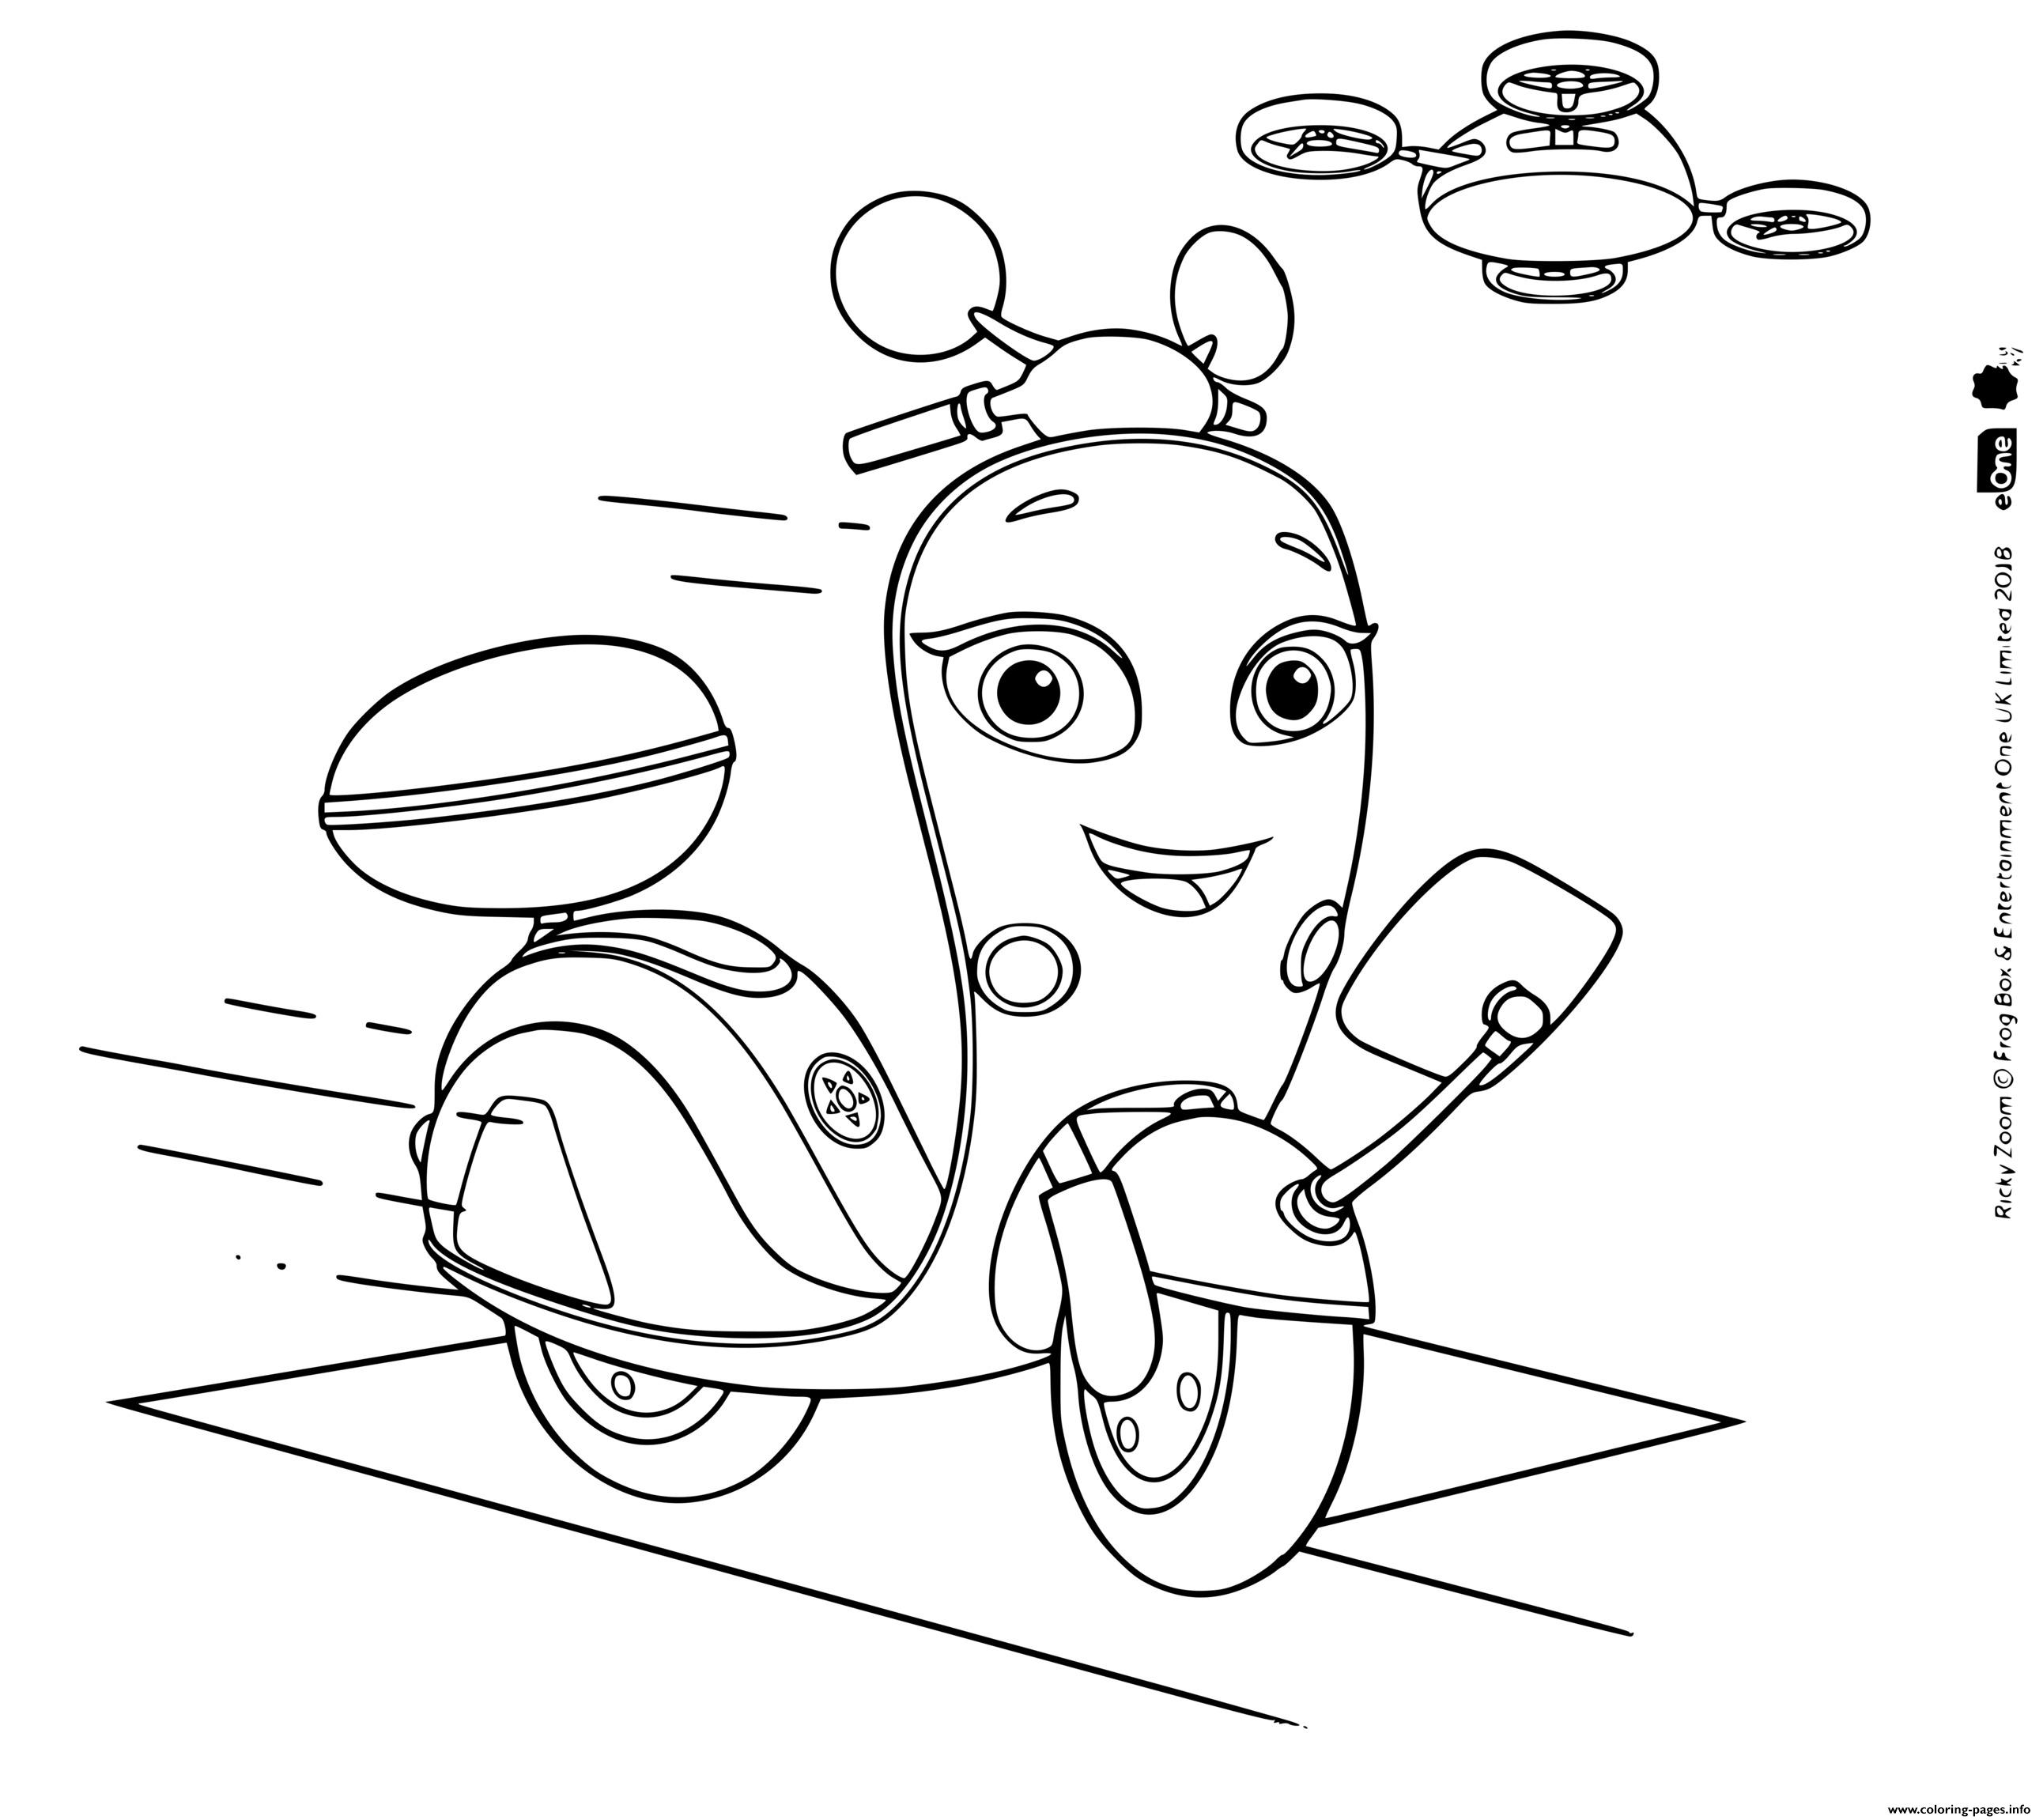 Scootio Wizzbang A Yellow Scooter With Blue Eyes Coloring page Printable